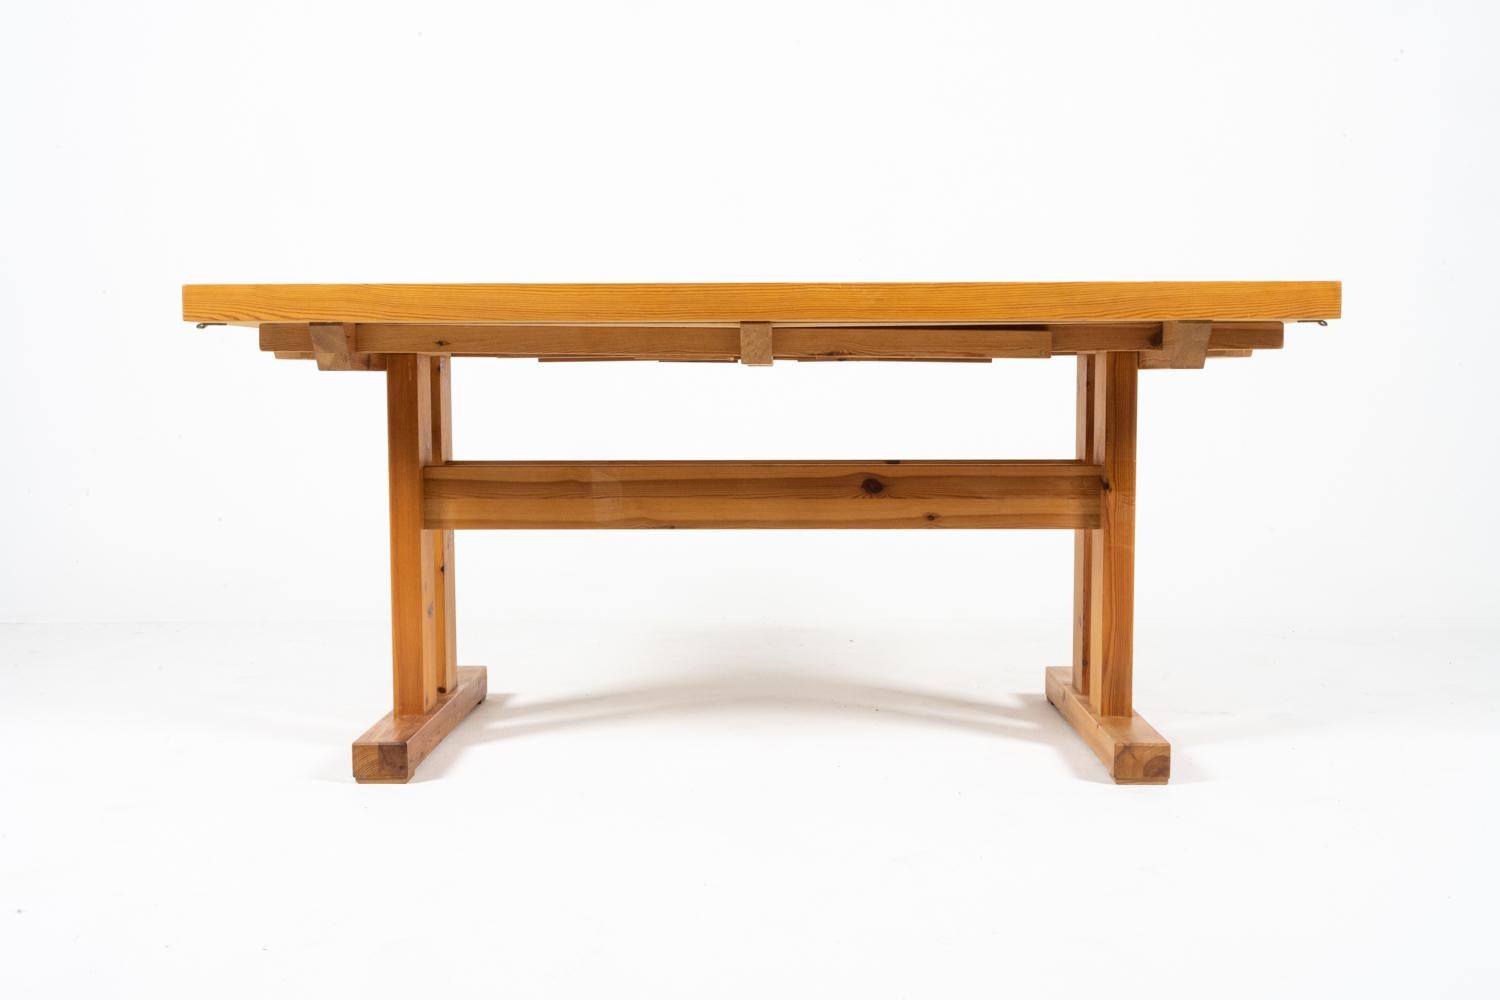 Danish Jens Lyngsoe-Style Pine Trestle Dining Table, c. 1980's In Good Condition For Sale In Norwalk, CT